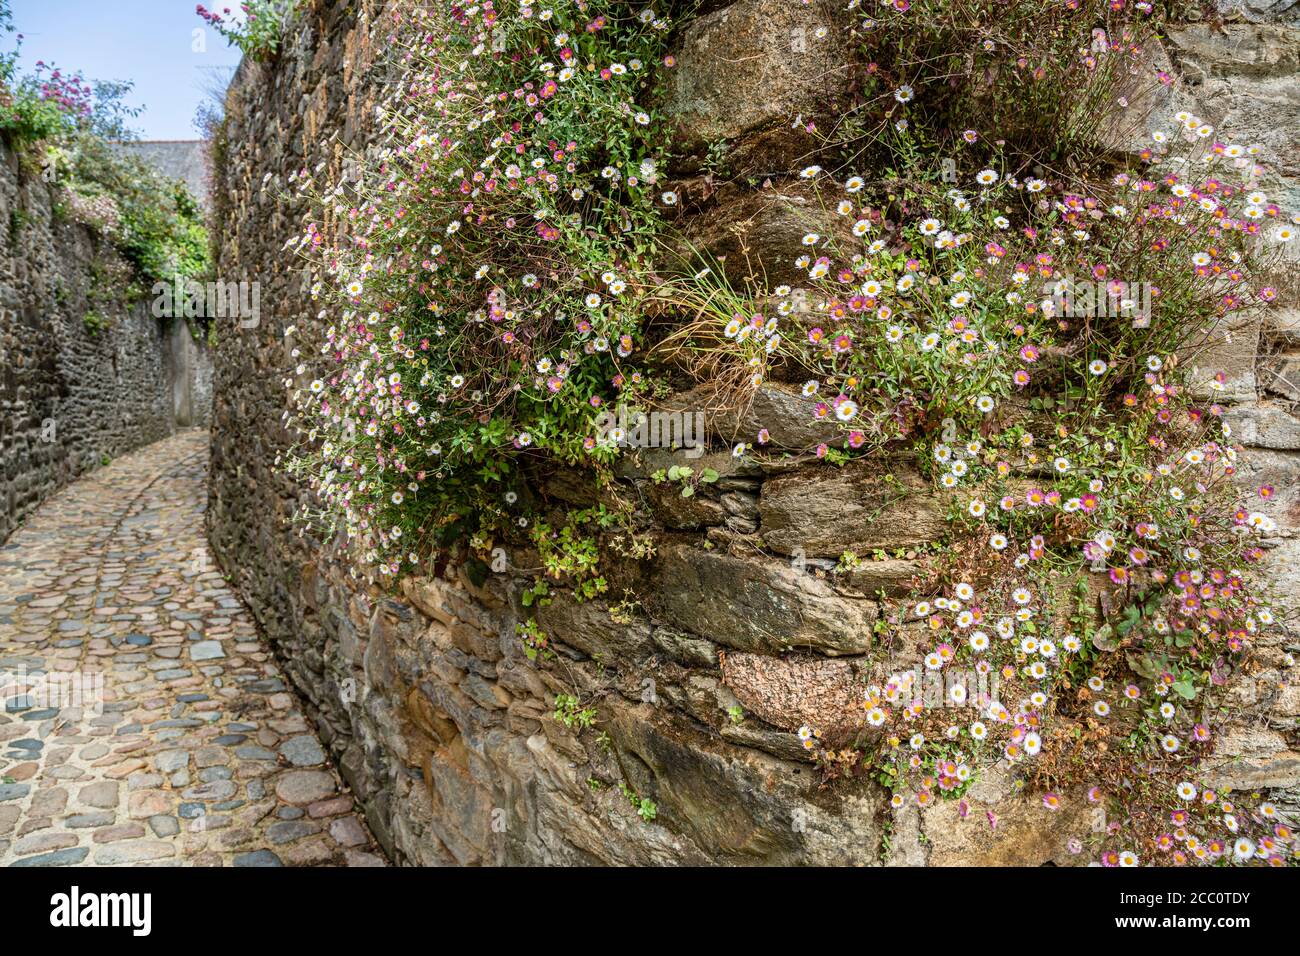 The daisy-like blooms of fleabane growing on an old wall at Tréguier, Côtes-d'Armor, Brittany, France Stock Photo